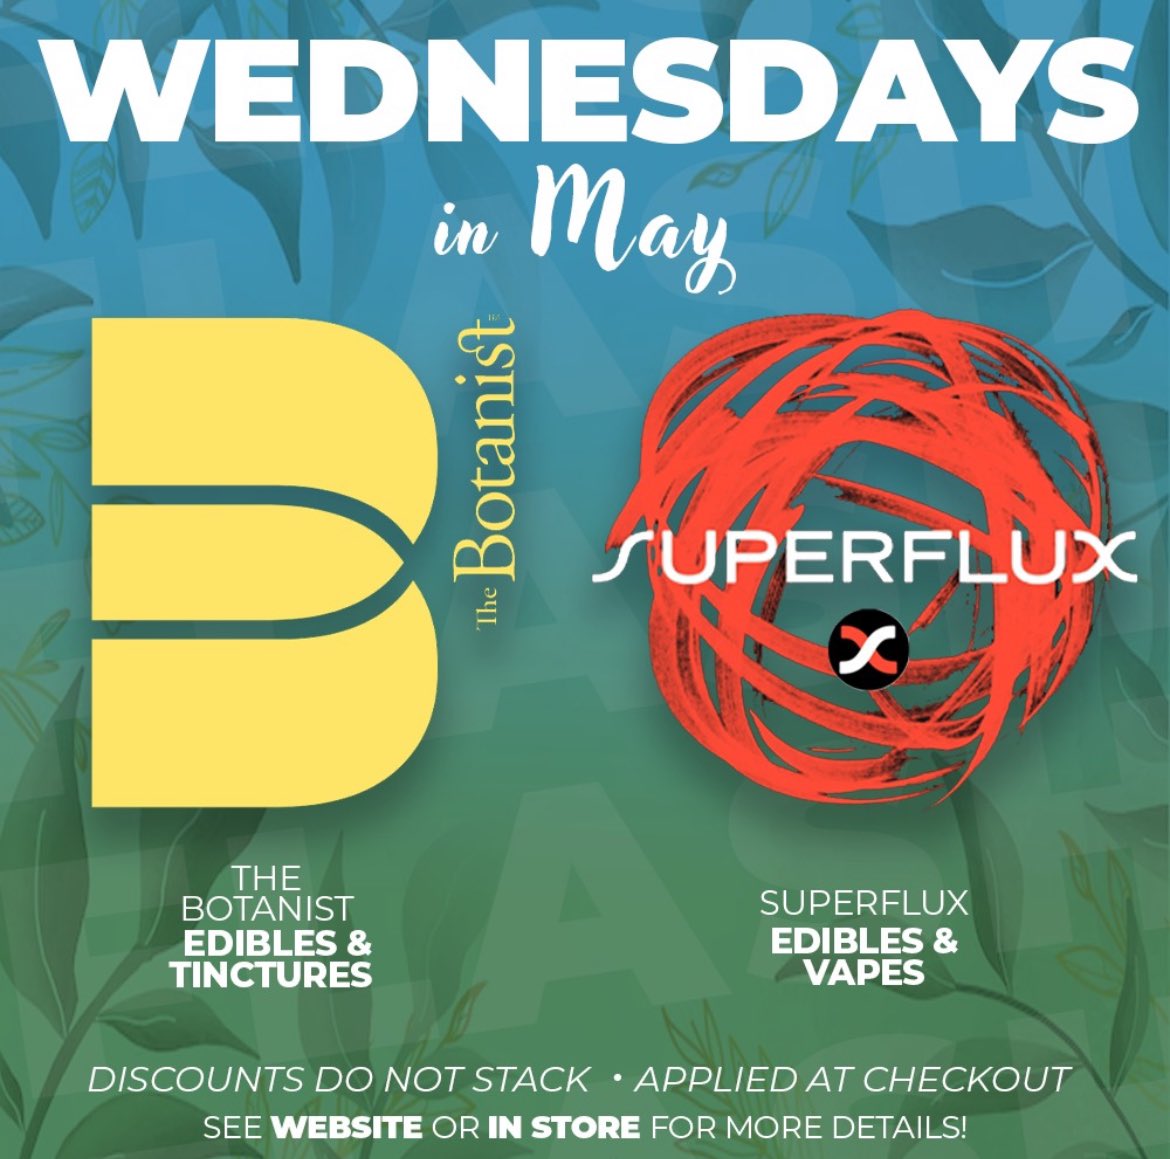 WEDNESDAYS IN MAY!

#thebotanist #superflux #cookies #cookiespeoriaheights #peoriaheights #peoriail #dispensary #discovery #adventure #explore #plant #chill #nextgeneration #levelup #sophisticated #highquality